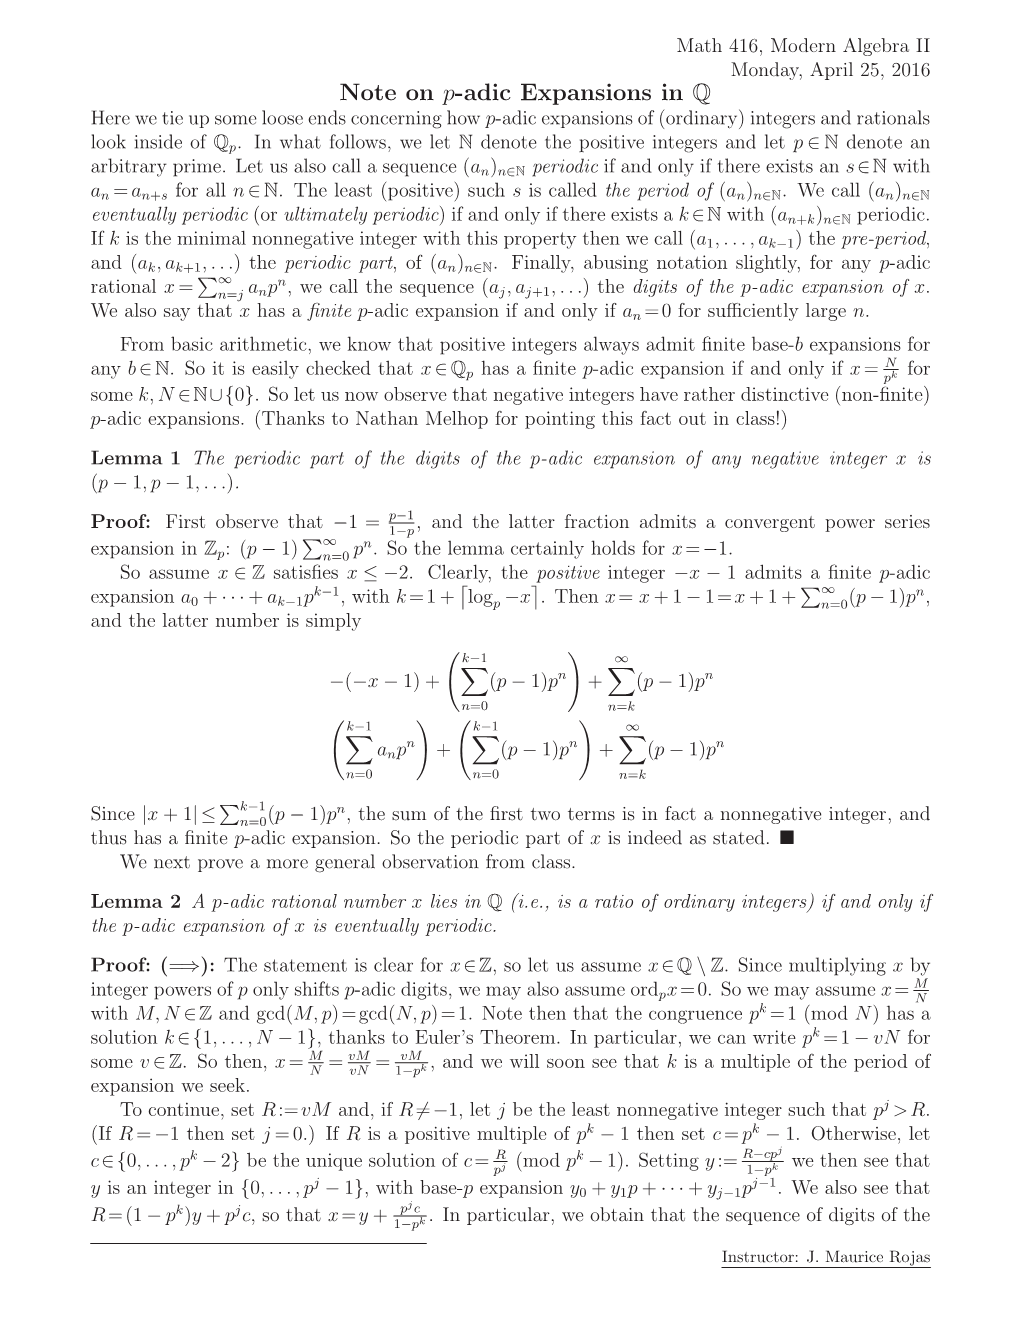 Note on P-Adic Expansions in Q Here We Tie up Some Loose Ends Concerning How P-Adic Expansions of (Ordinary) Integers and Rationals Look Inside of Qp